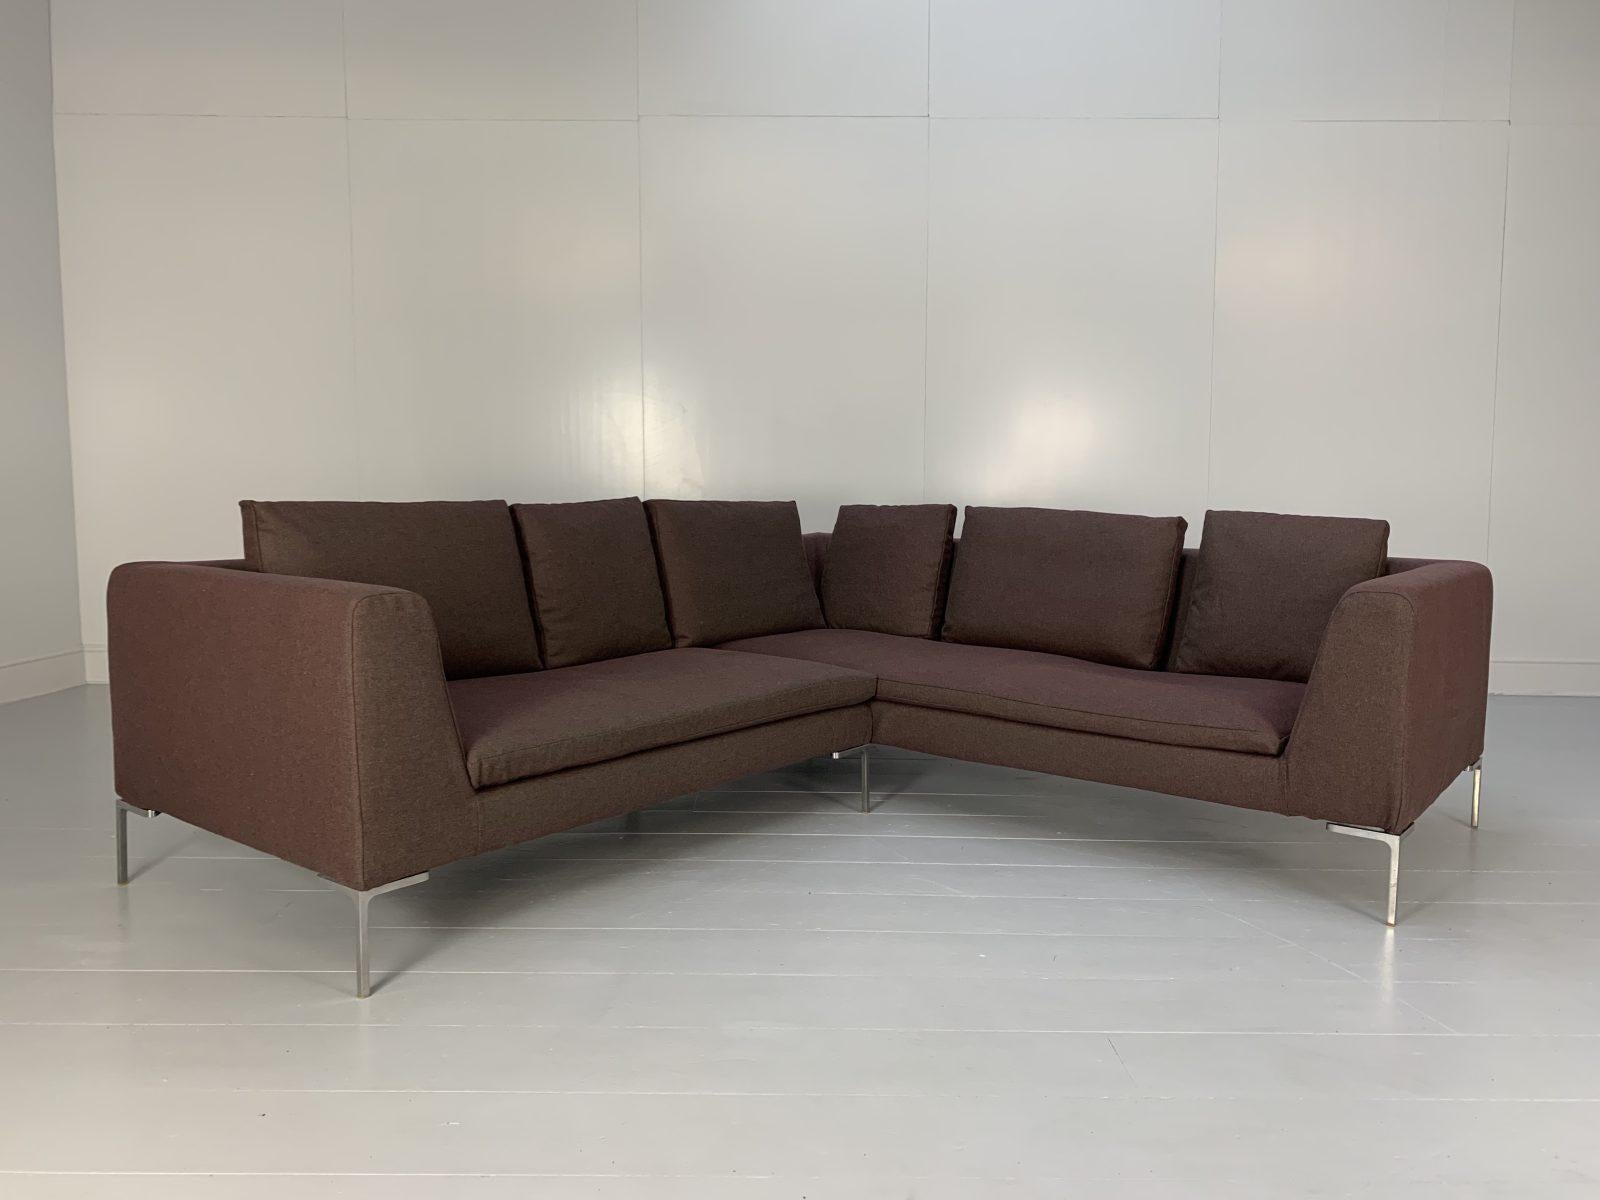 Hello Friends, and welcome to another unmissable offering from Lord Browns Furniture, the UK’s premier resource for fine Sofas and Chairs.

On offer on this occasion is an iconic “Charles” 3-Section L-Shape Sofa (consisting of a CH156S, and a